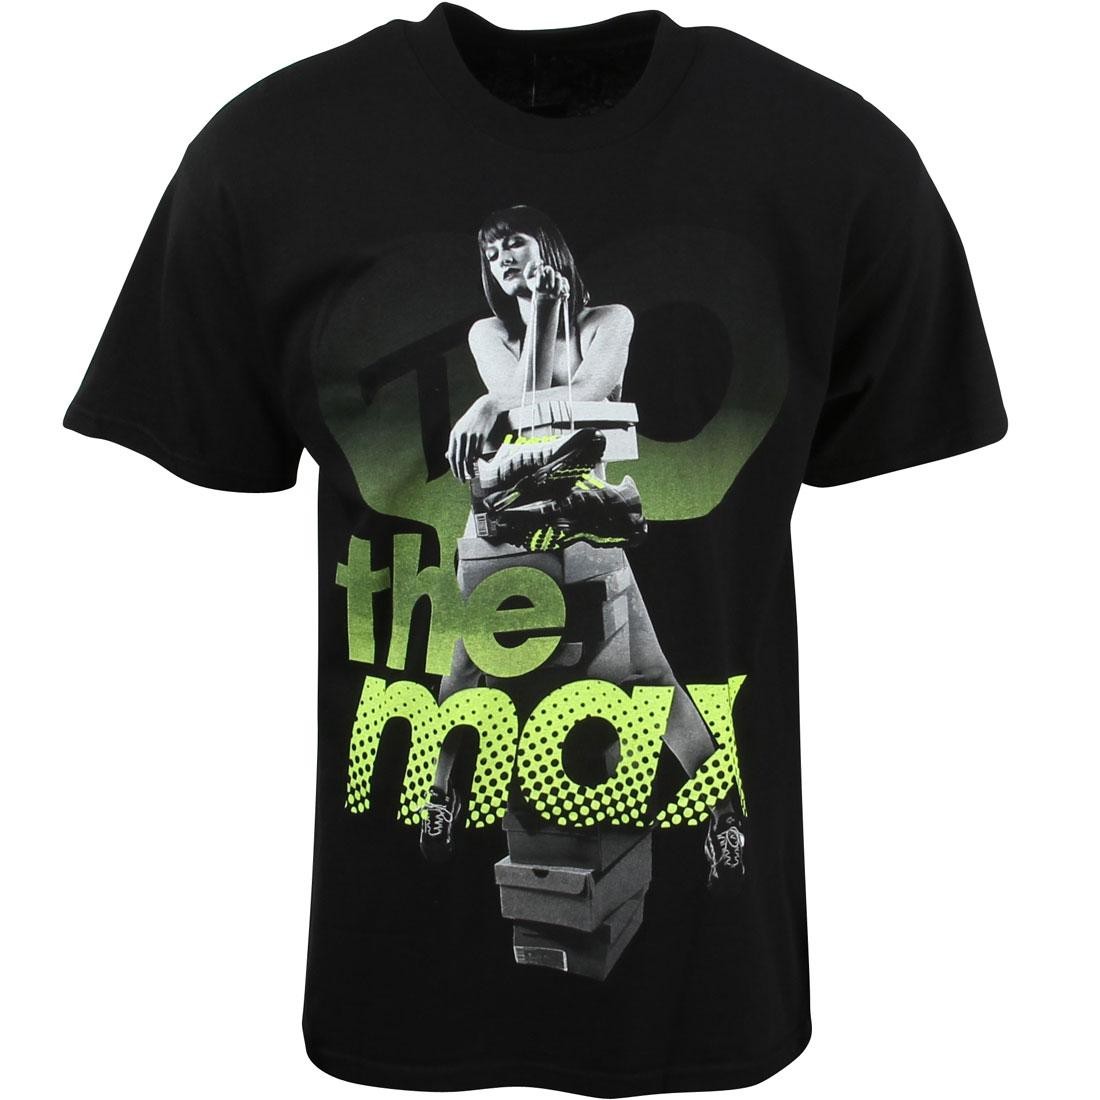 TITS x PYS.com Exclusive To The Max Tee (black) - PYS.com Collab